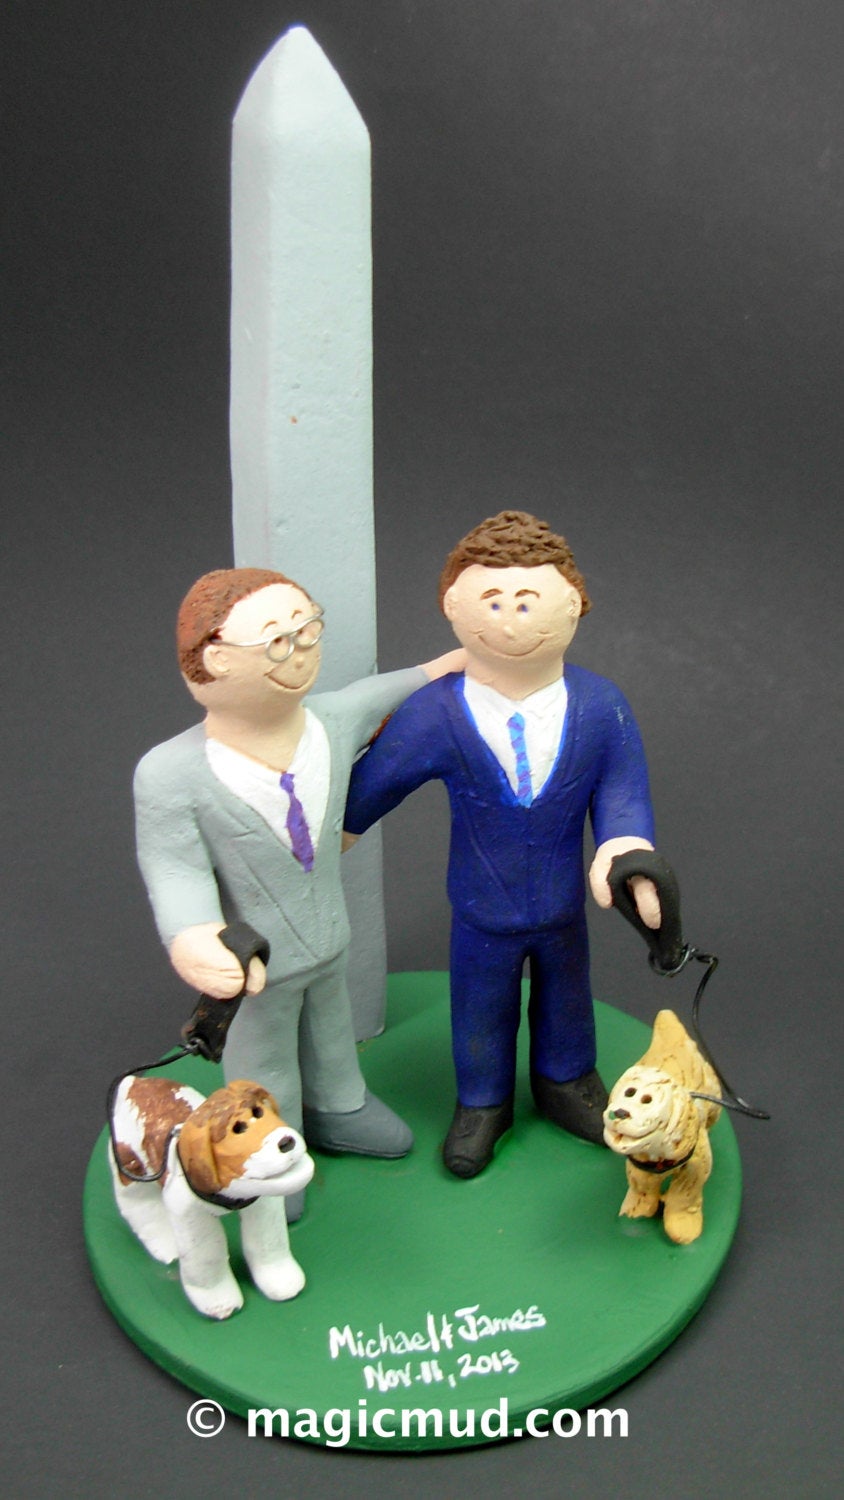 Same Sex Wedding Cake Topper with Pet Dogs , Gay Wedding Cake Topper, Caketopper for 2 Men, Two Grooms Caketopper, Gays Wedding Cake Topper - iWeddingCakeToppers